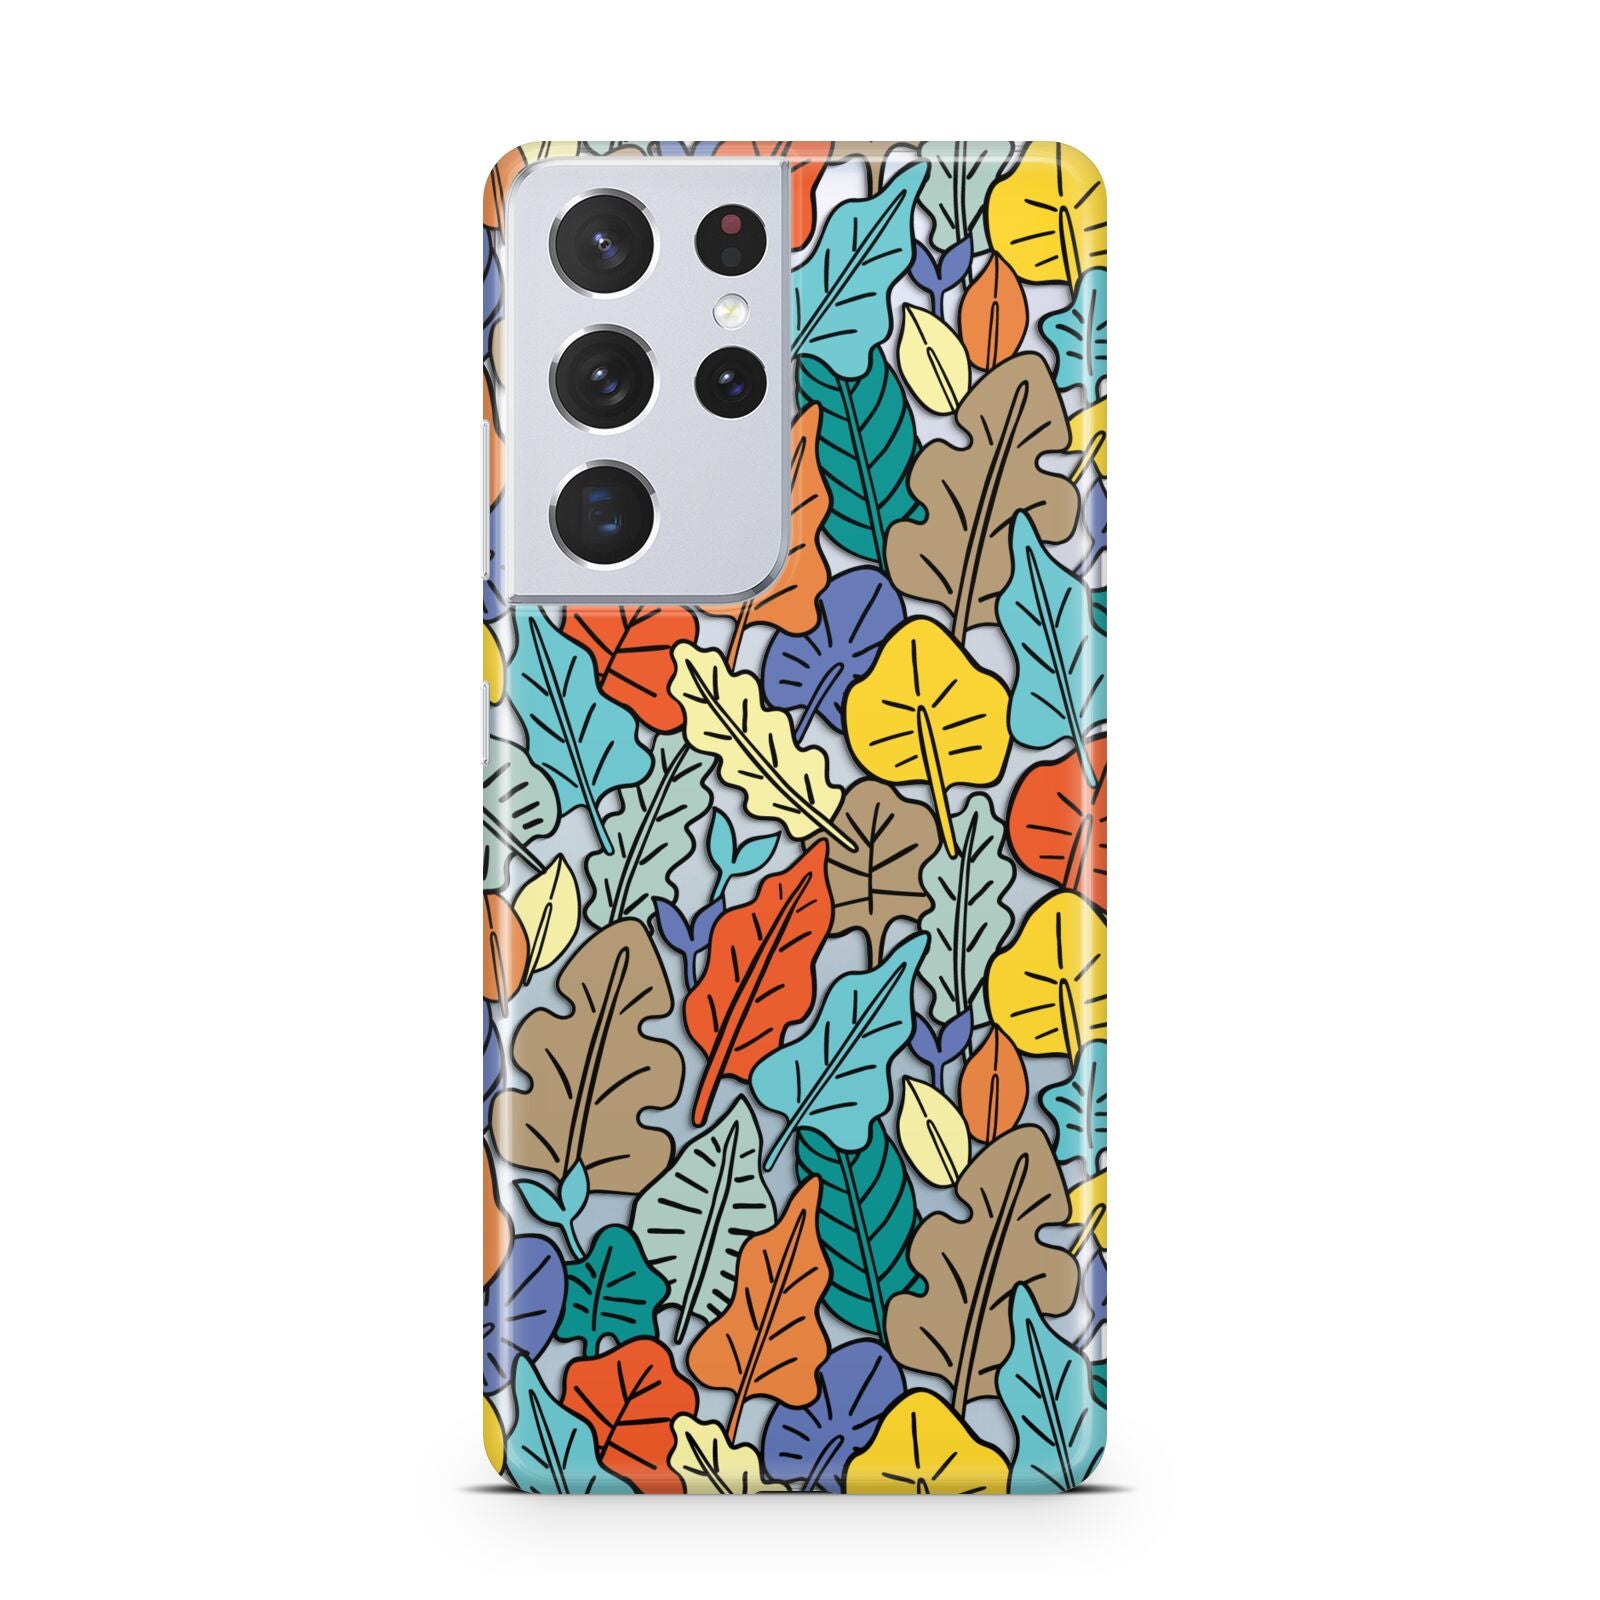 Autumn Leaves Samsung S21 Ultra Case